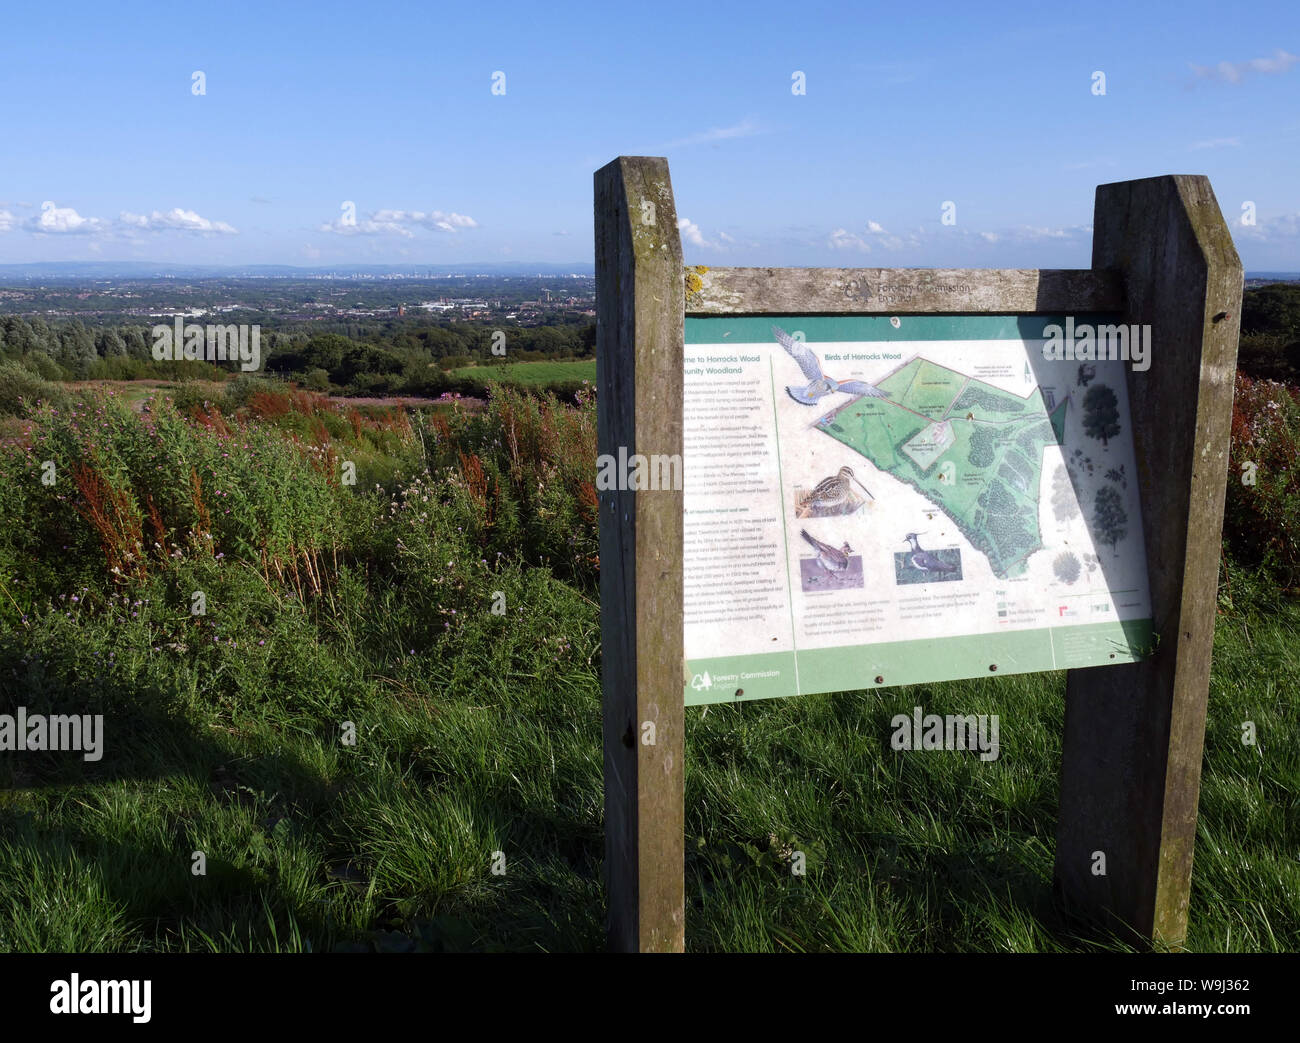 Forestry Commission England Sign illustrating Birds trees & wildlife in The Horrocks Wood Community Woodland, Bolton & Manchester in the distance Stock Photo